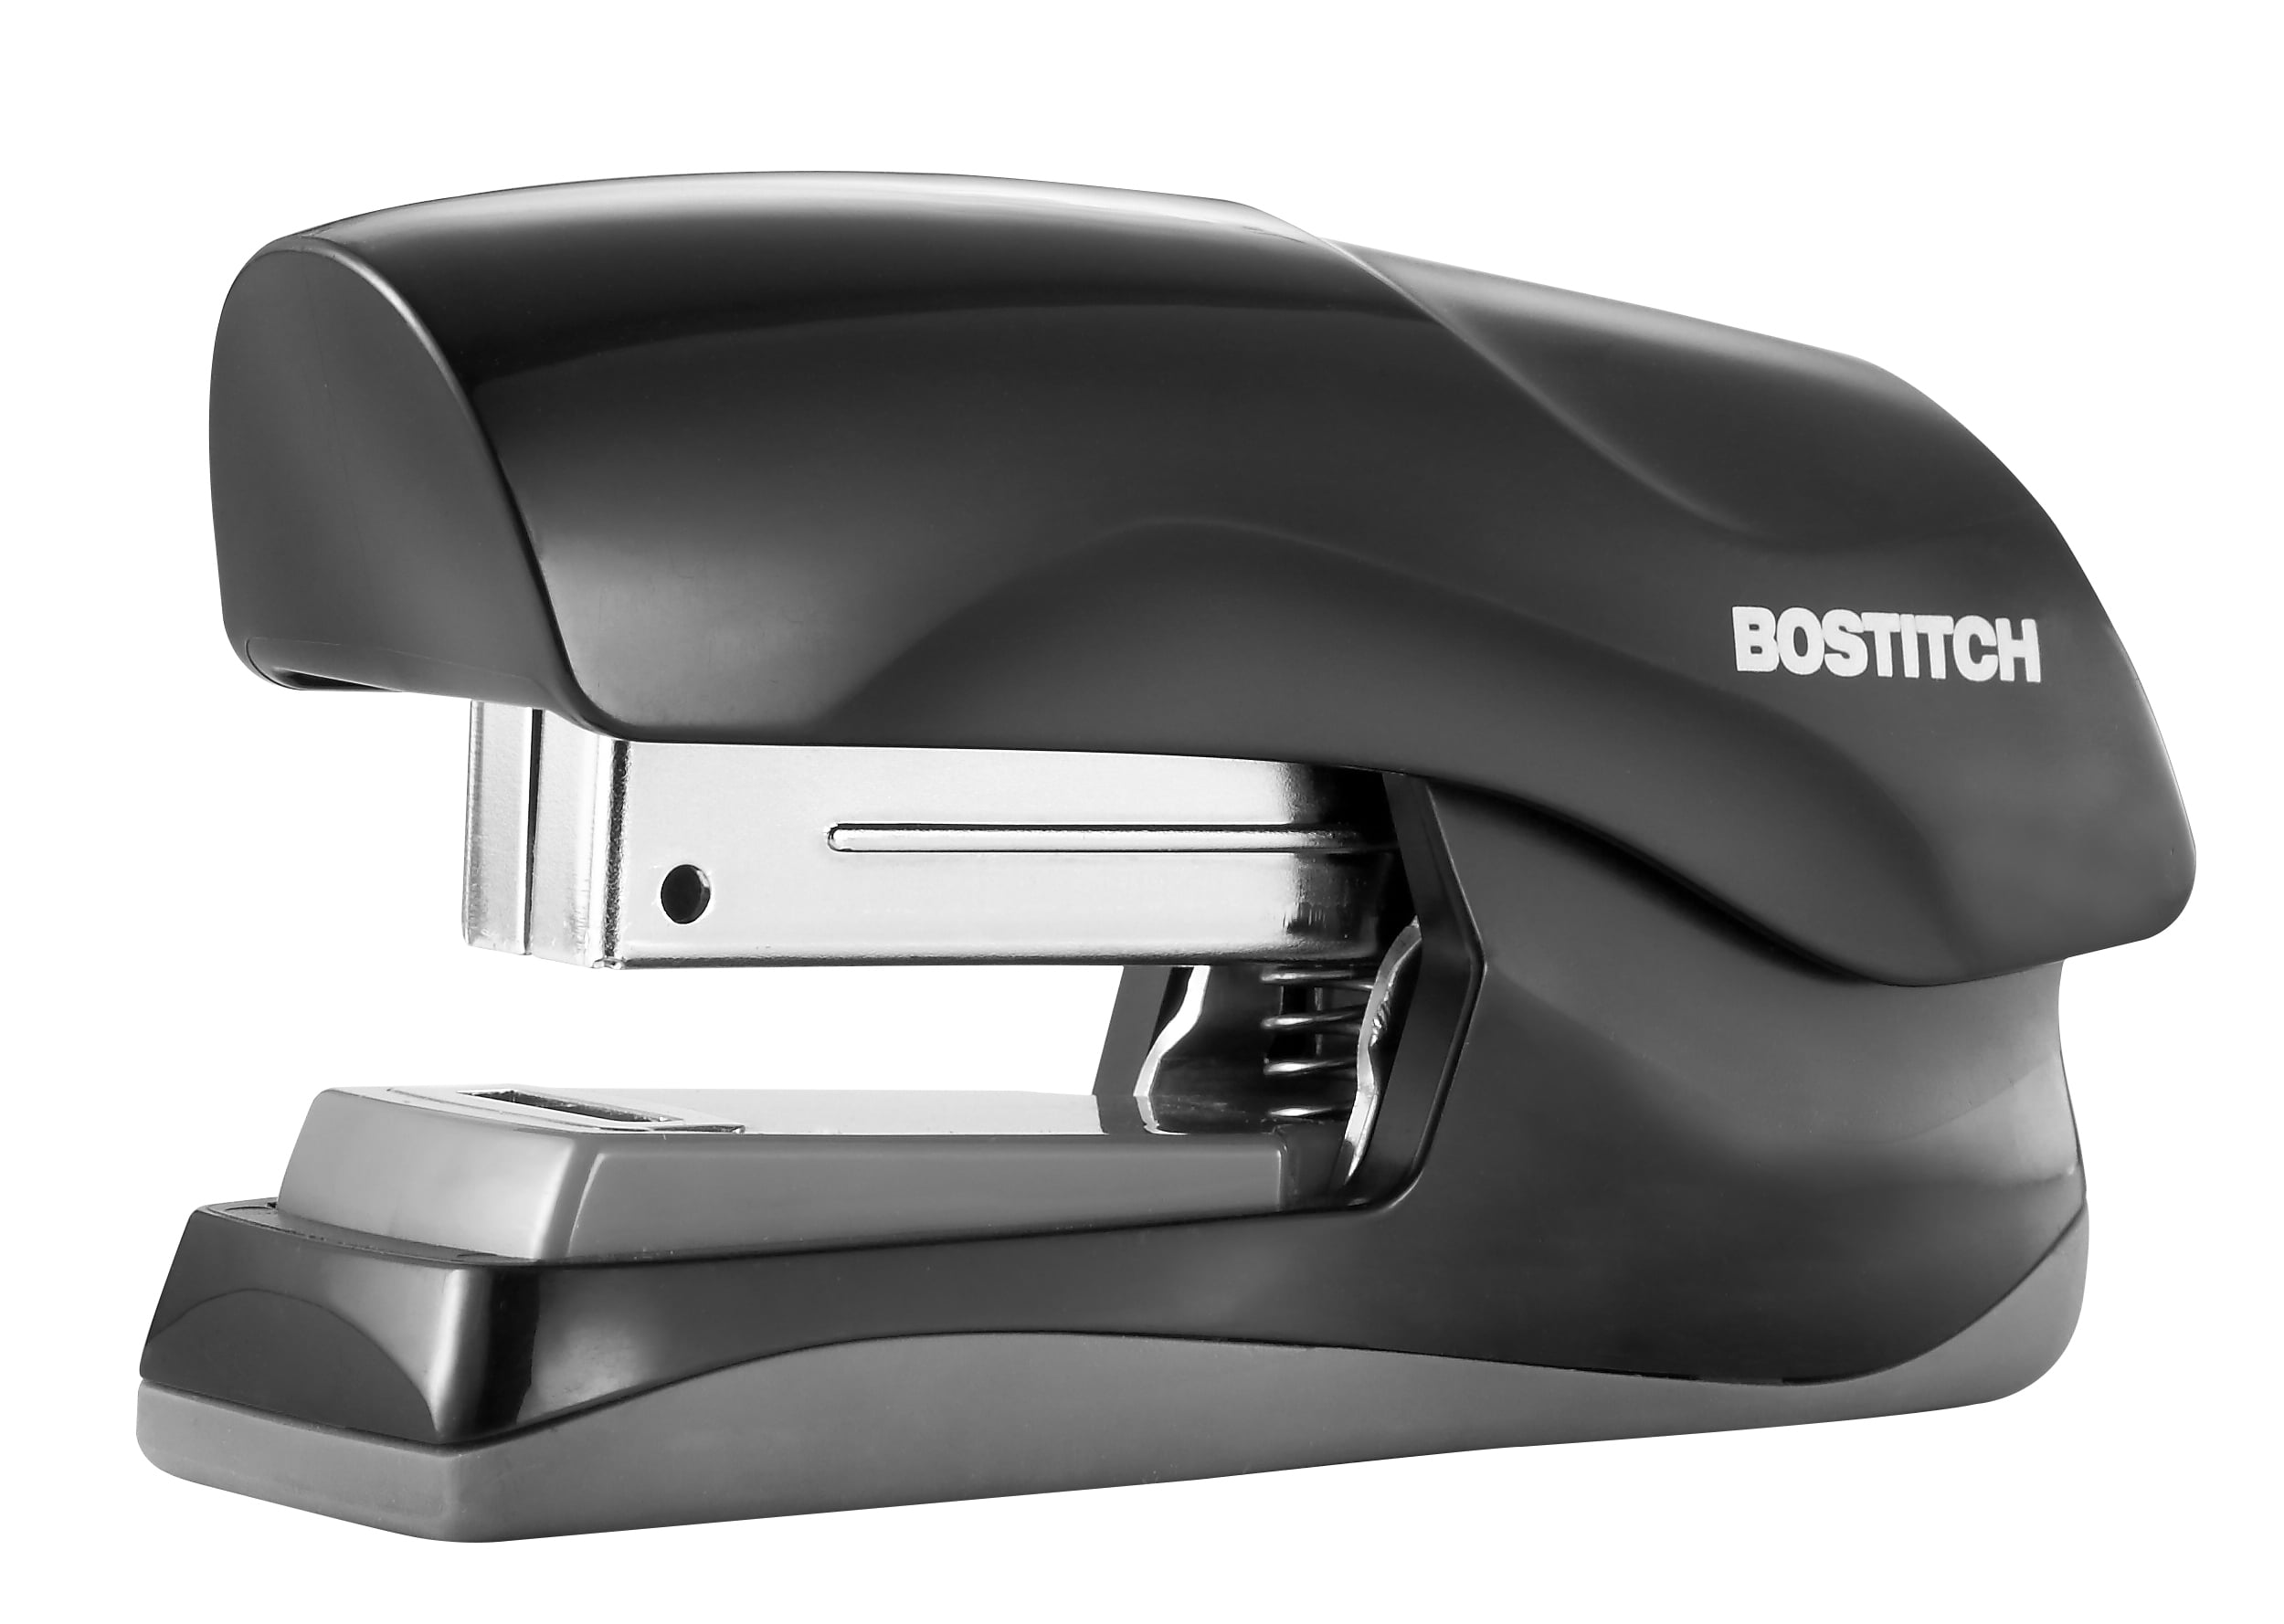 Fits into The Palm of Your Hand; Black B175-BLK - 2 Pack Small Stapler Size Bostitch Office Heavy Duty 40 Sheet Stapler 